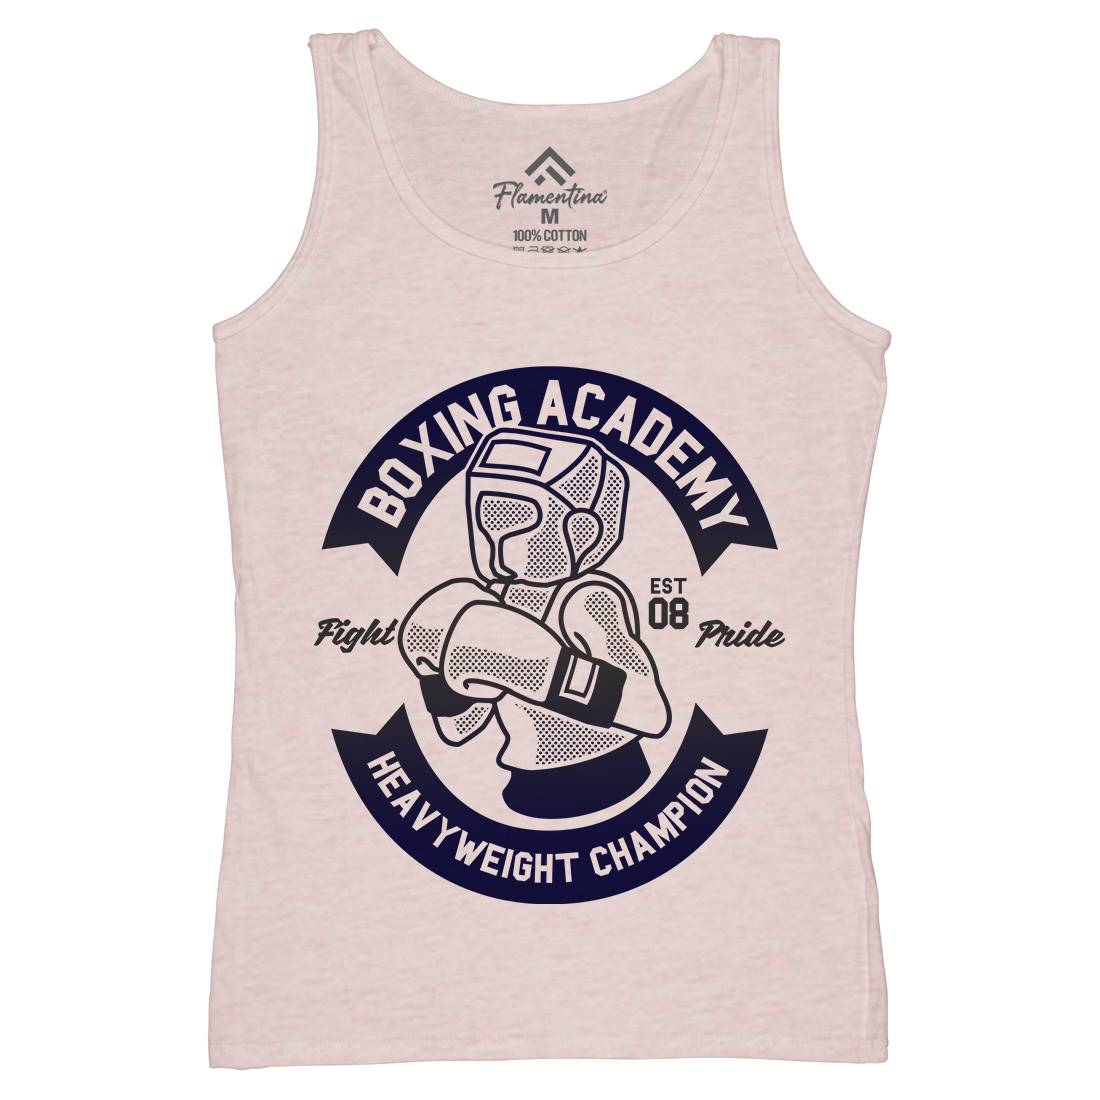 Boxing Academy Womens Organic Tank Top Vest Gym A213